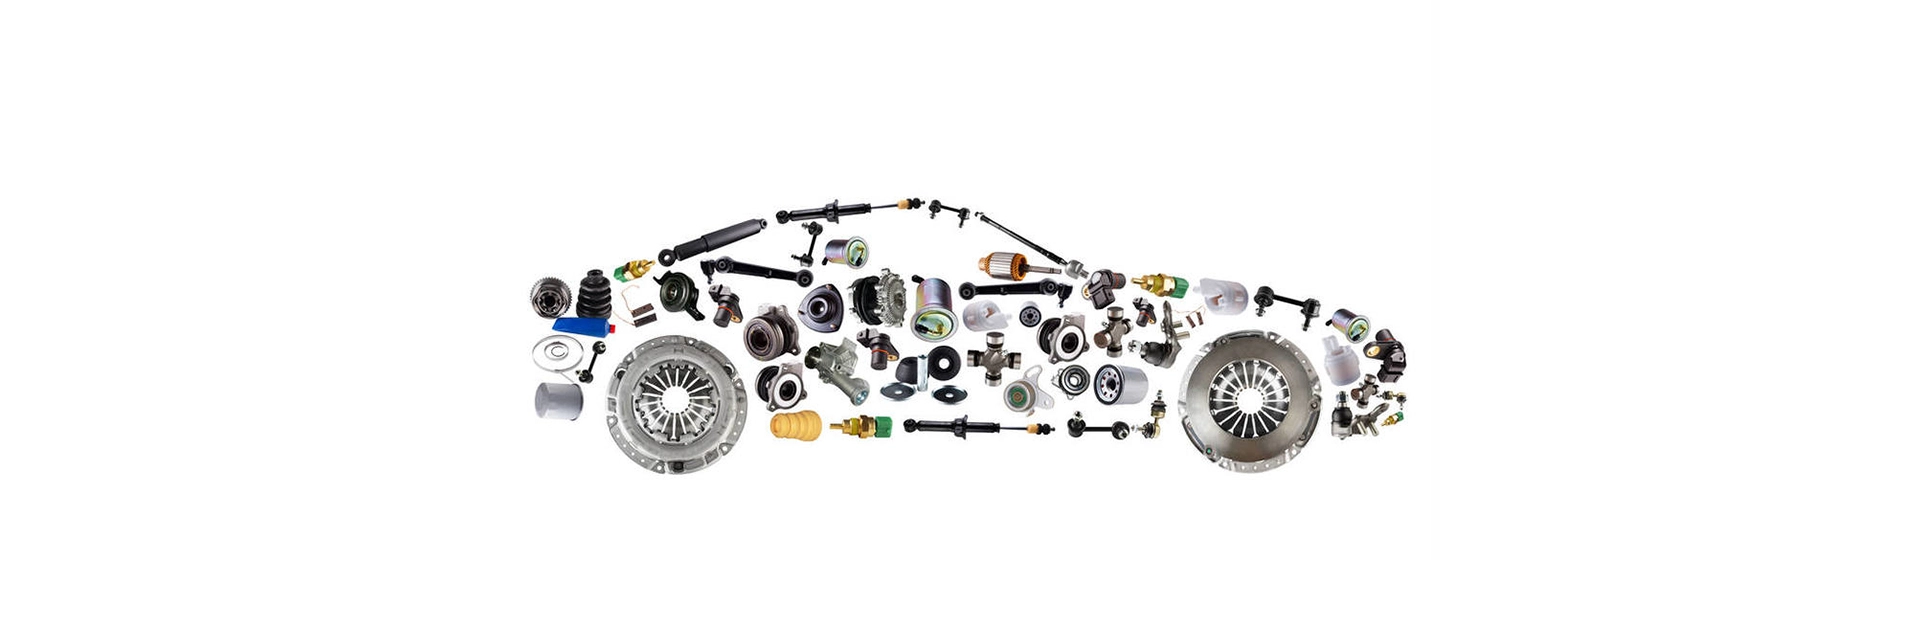 Auto Steering System Components